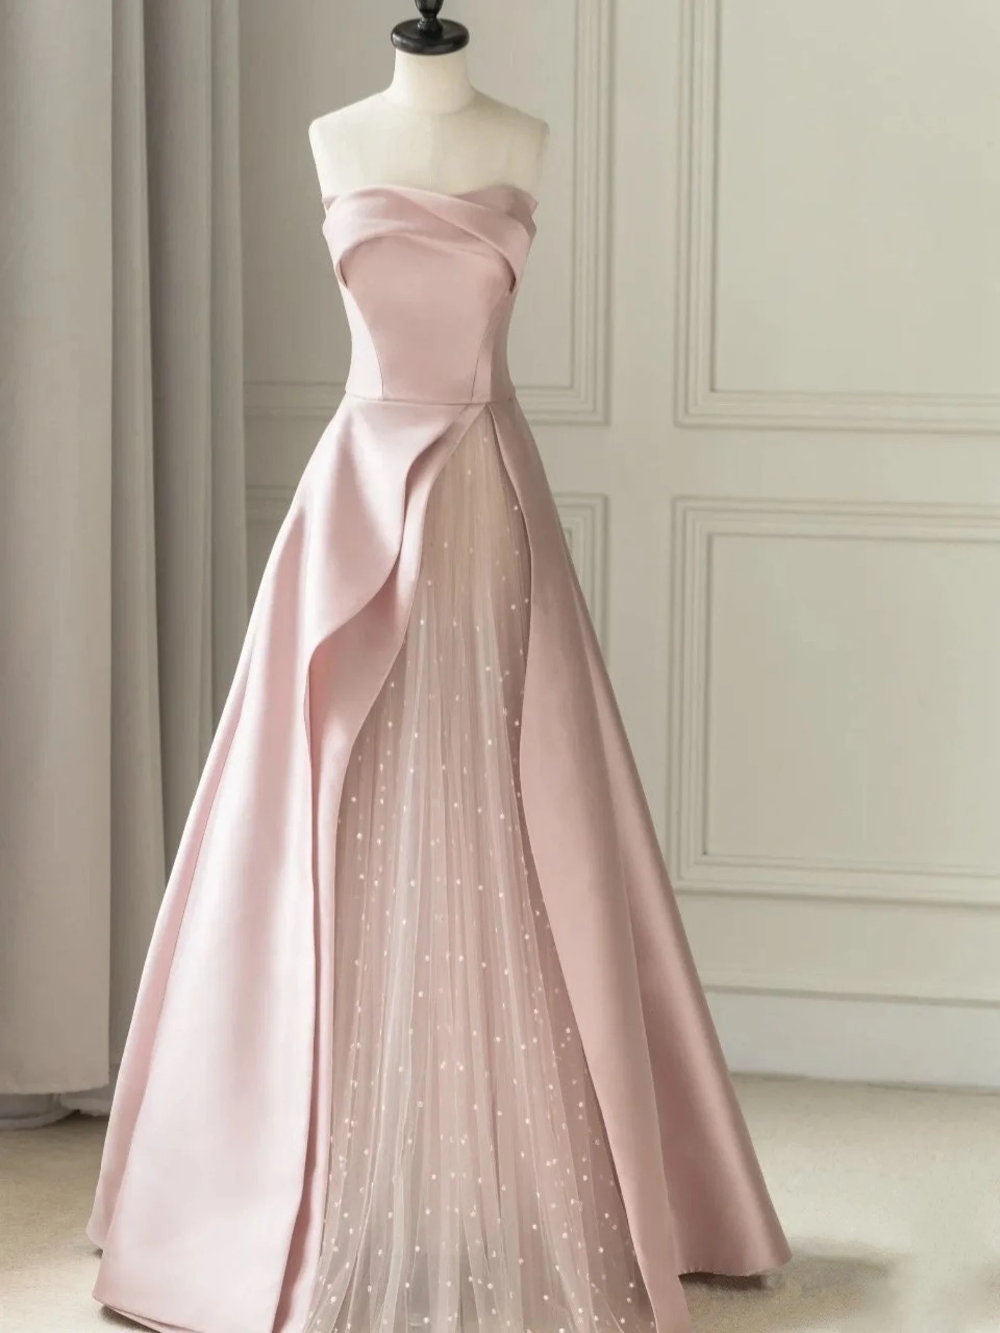 Timeless Elegance: A-Line Dress for Classic Style